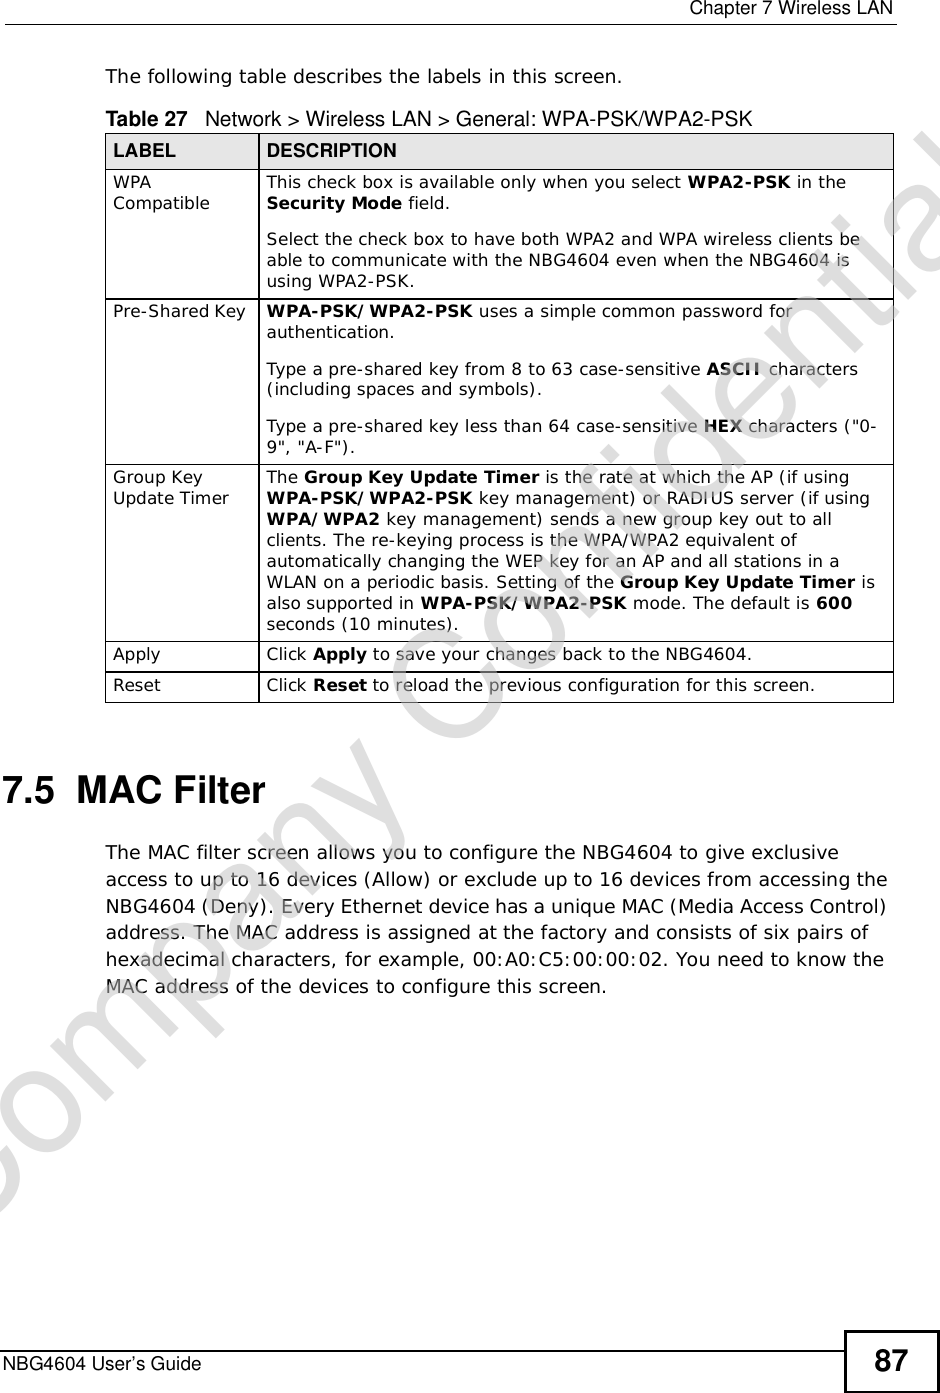  Chapter 7Wireless LANNBG4604 User’s Guide 87The following table describes the labels in this screen.7.5  MAC FilterThe MAC filter screen allows you to configure the NBG4604 to give exclusive access to up to 16 devices (Allow) or exclude up to 16 devices from accessing the NBG4604 (Deny). Every Ethernet device has a unique MAC (Media Access Control) address. The MAC address is assigned at the factory and consists of six pairs of hexadecimal characters, for example, 00:A0:C5:00:00:02. You need to know the MAC address of the devices to configure this screen.Table 27   Network &gt; Wireless LAN &gt; General: WPA-PSK/WPA2-PSKLABEL DESCRIPTIONWPA Compatible This check box is available only when you select WPA2-PSK in the Security Mode field.Select the check box to have both WPA2 and WPA wireless clients be able to communicate with the NBG4604 even when the NBG4604 is using WPA2-PSK.Pre-Shared Key  WPA-PSK/WPA2-PSK uses a simple common password for authentication.Type a pre-shared key from 8 to 63 case-sensitive ASCII characters (including spaces and symbols).Type a pre-shared key less than 64 case-sensitive HEX characters (&quot;0-9&quot;, &quot;A-F&quot;).Group Key Update Timer The Group Key Update Timer is the rate at which the AP (if using WPA-PSK/WPA2-PSK key management) or RADIUSserver (if using WPA/WPA2 key management) sends a new group key out to all clients. The re-keying process is the WPA/WPA2 equivalent of automatically changing the WEP key for an AP and all stations in a WLAN on a periodic basis. Setting of the Group Key Update Timer is also supported in WPA-PSK/WPA2-PSK mode. The default is 600seconds (10 minutes).Apply Click Apply to save your changes back to the NBG4604.Reset Click Reset to reload the previous configuration for this screen.Company Confidential